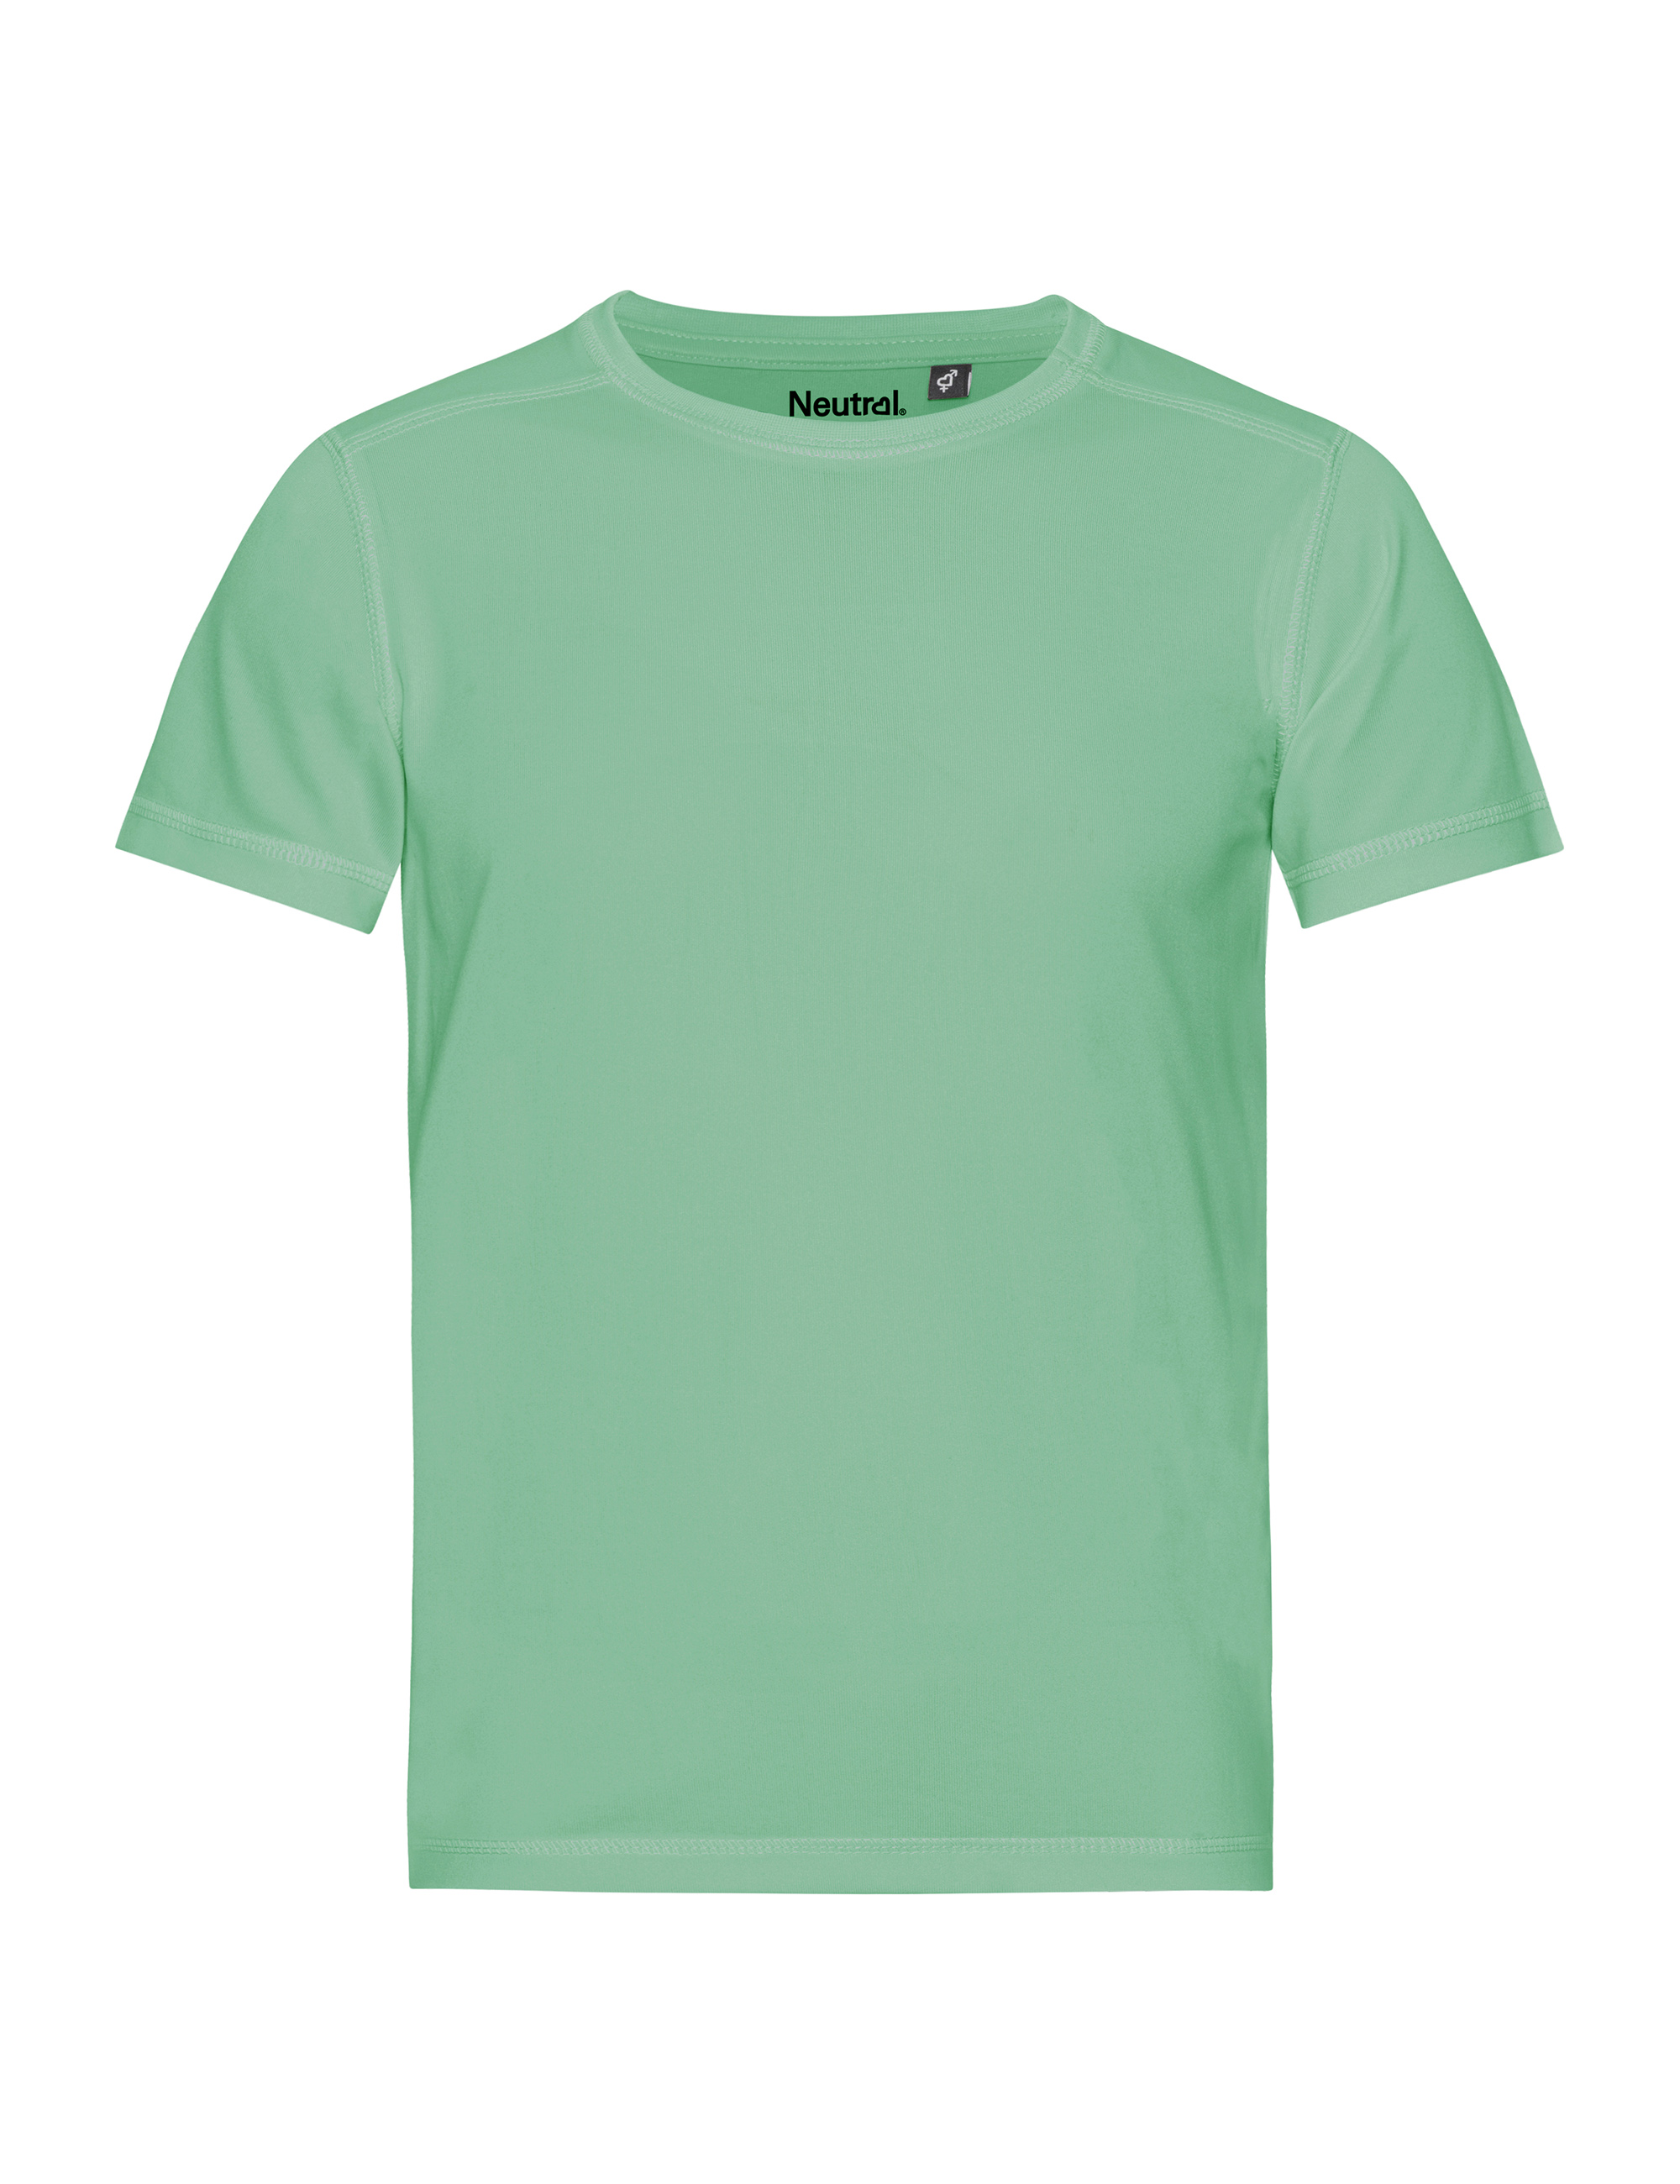 Fairtrade Recycled Performance Kinder-T-Shirt 155 g/m² Neutral® Dusty Mint  92/98 cm